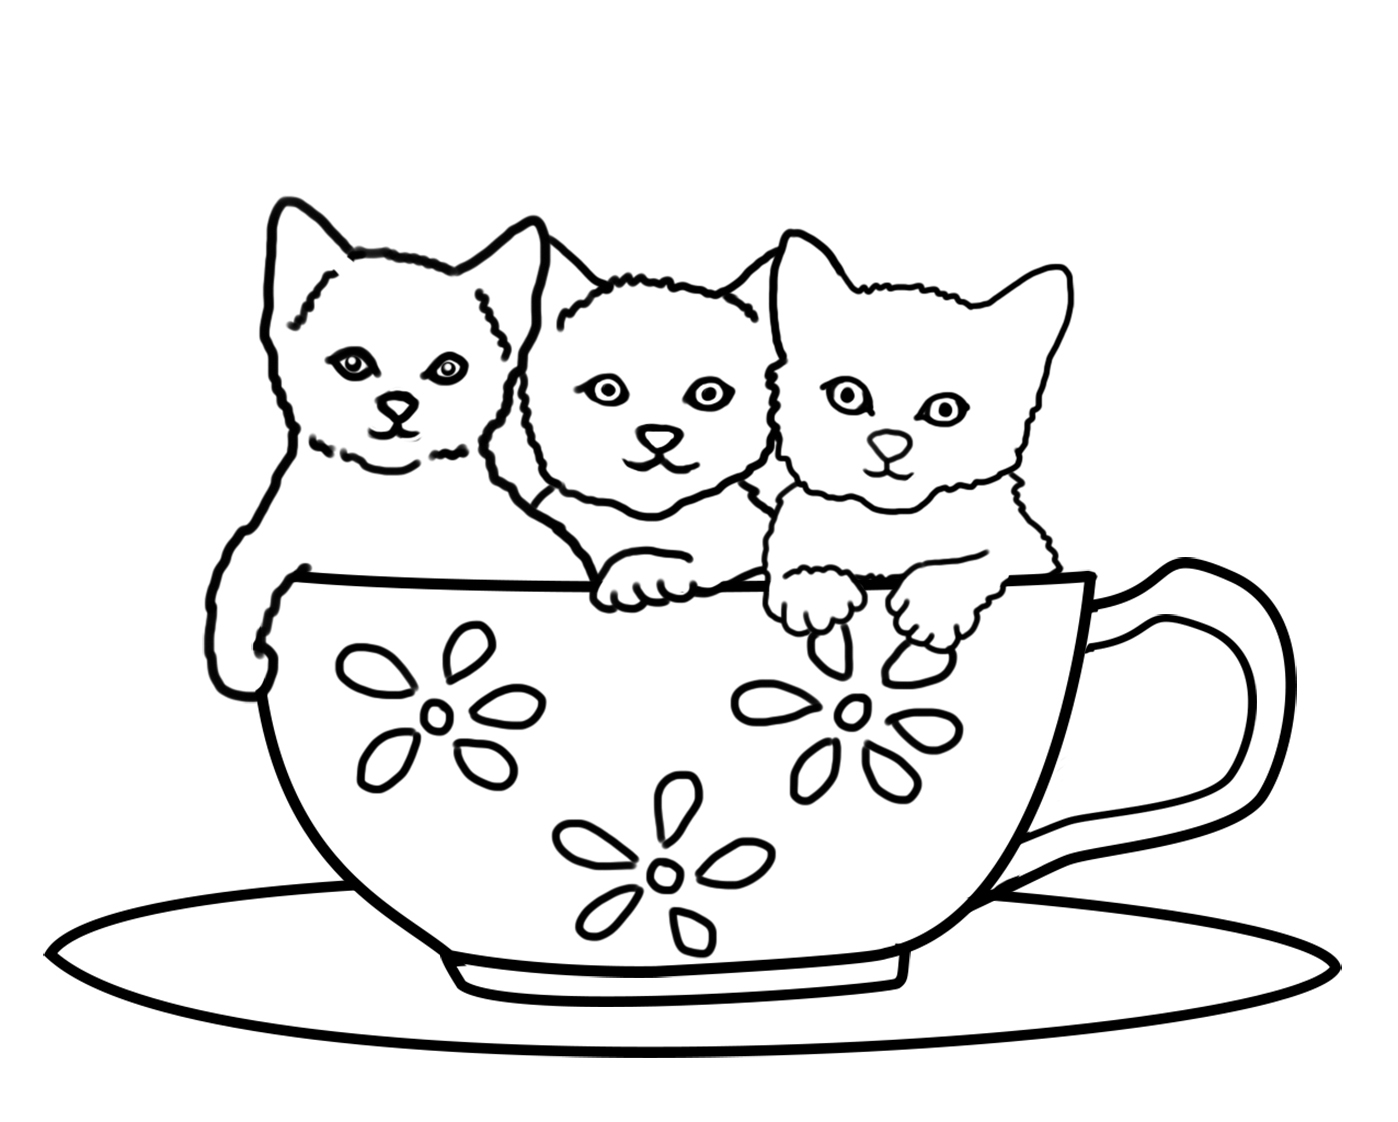 Exploding Kittens Coloring Pages - Kittens clipart coloring page